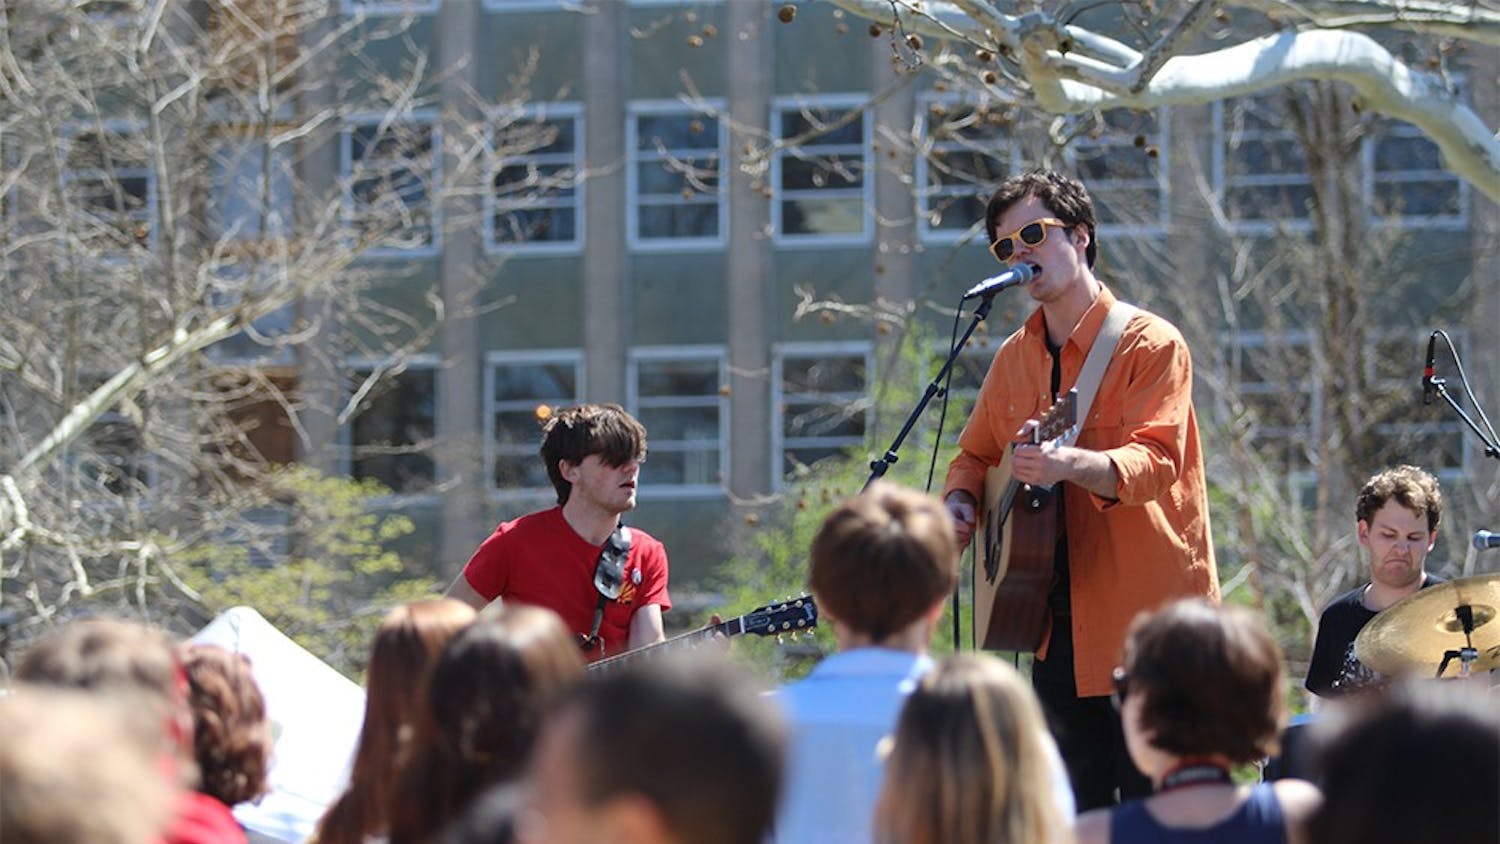 Members of Dietrich Jon, a local band from Bloomington, perform during the Culture Shock Music Festival hosted by WIUX on April 10, 2015.